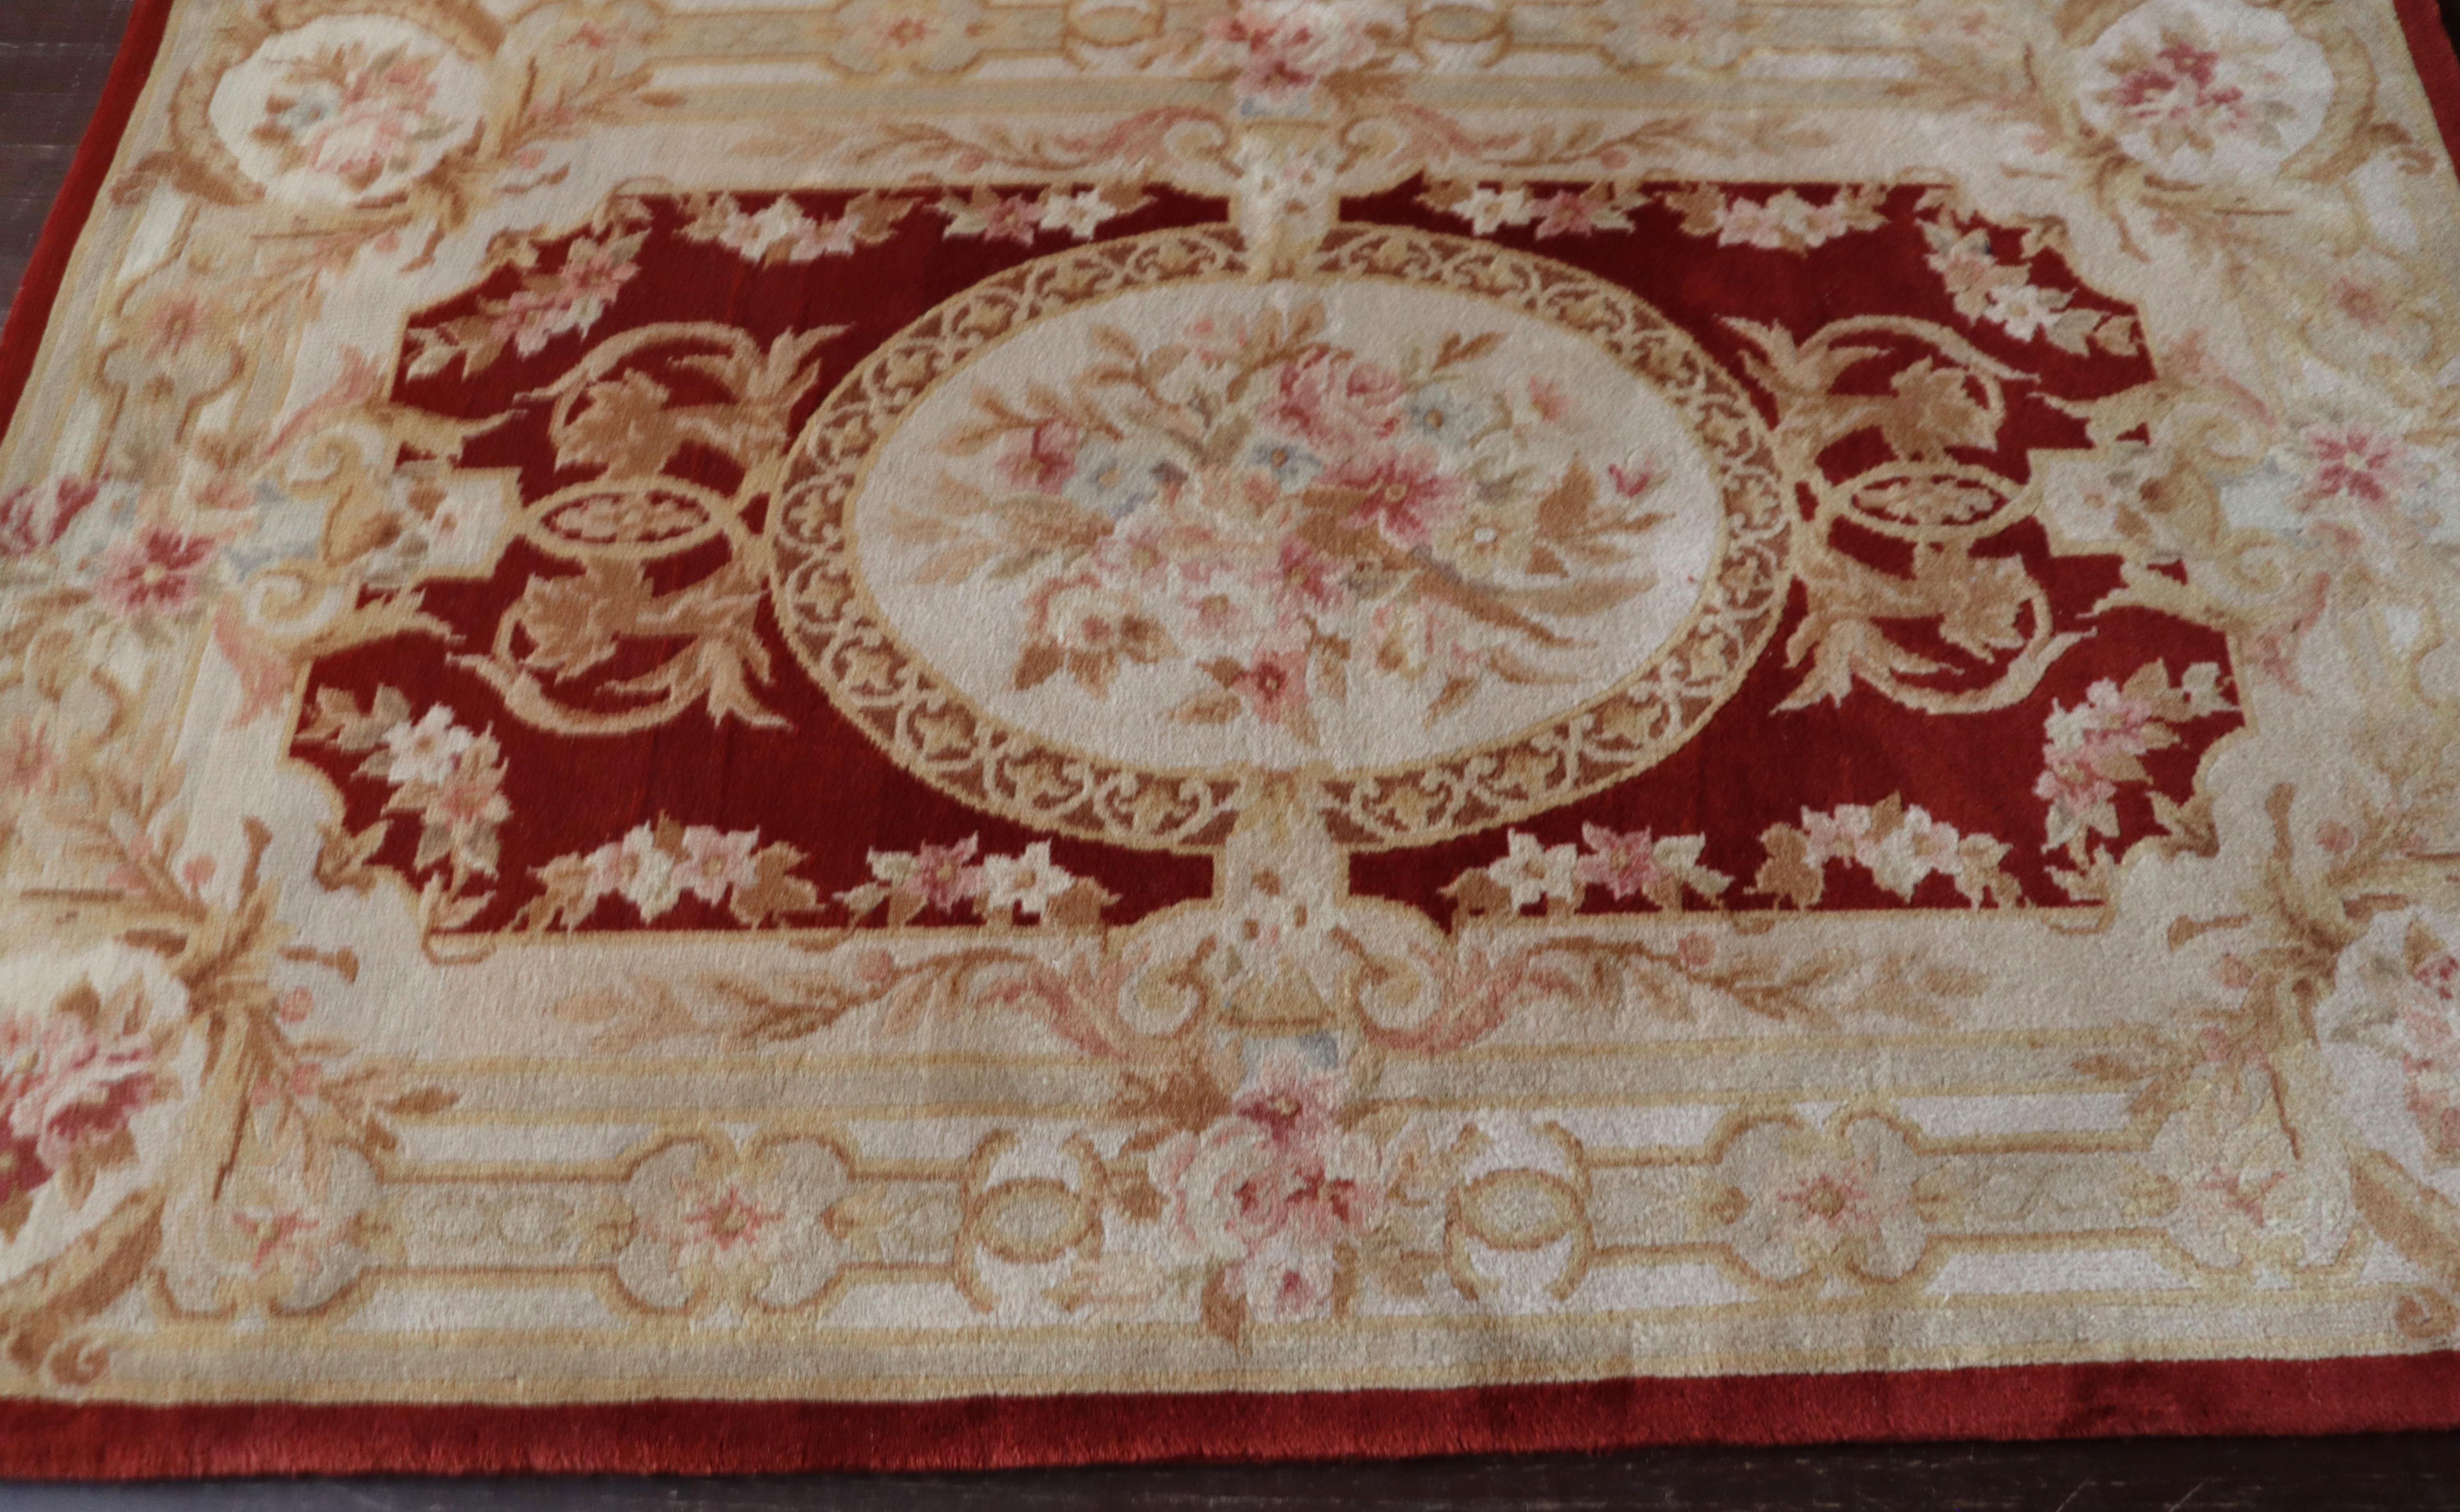 Aubusson Savonnerie rugs are very accurate reproductions of absolute original French design produced from the 17th through 19th century in the factories Aubusson, which gave the name to these rugs. Originally they were produced for the French royal